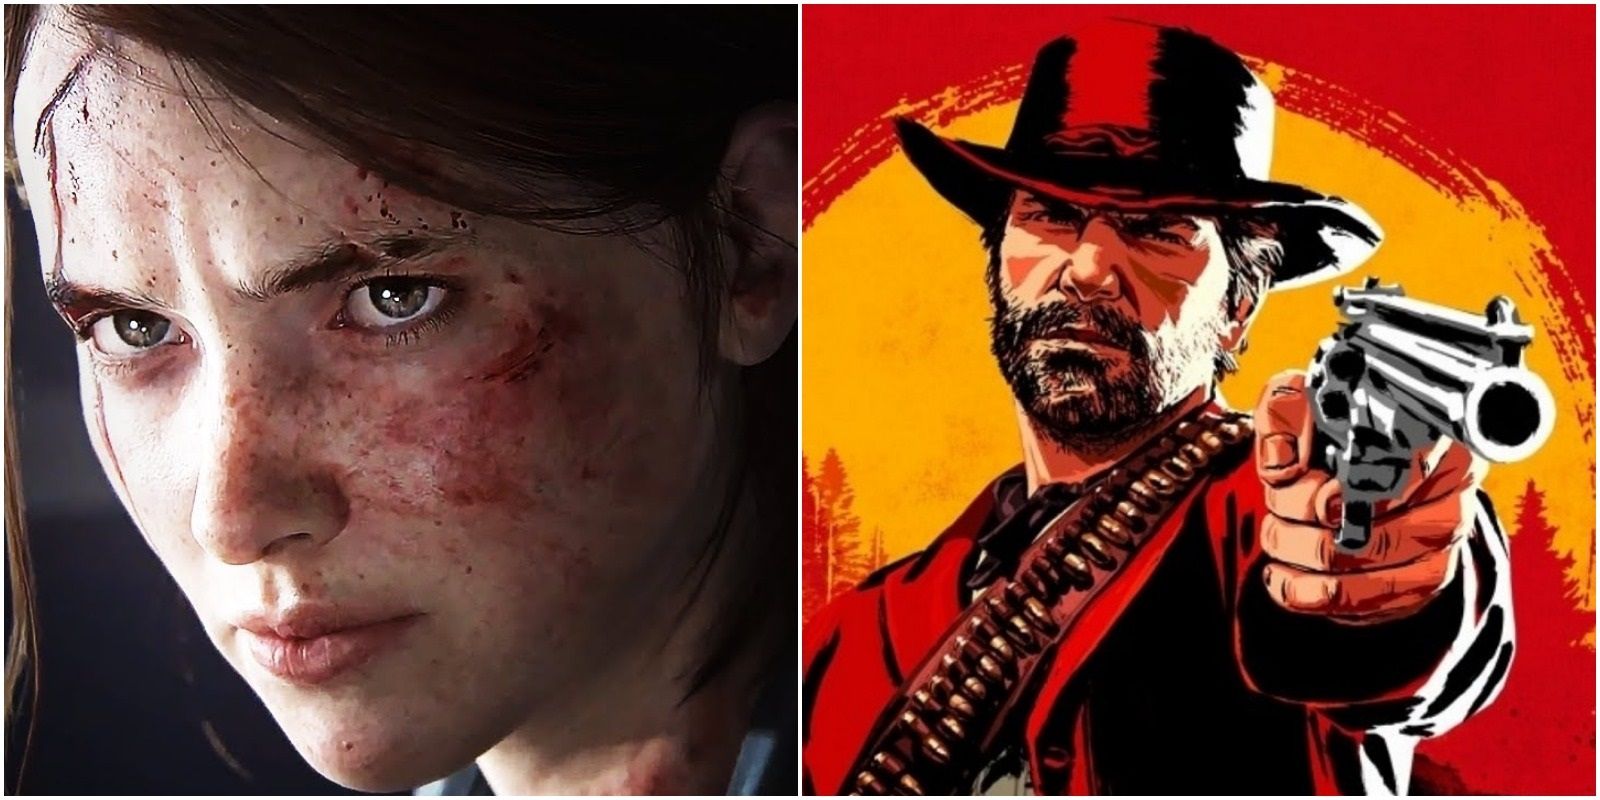 TLOU and RDR2